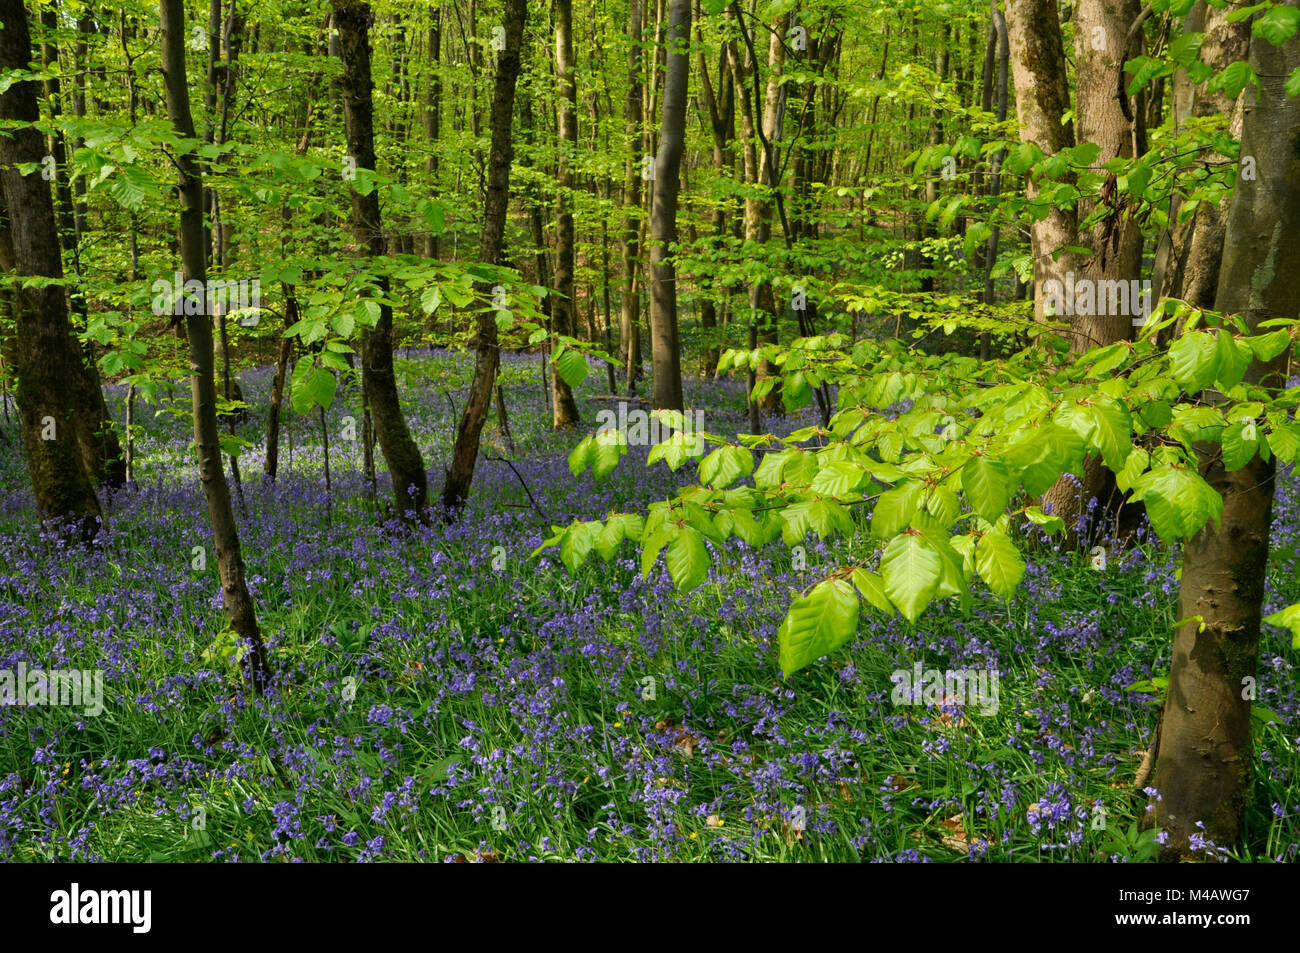 Bluebells,Hyacinthoides non-scripta, in a wood of young beech trees, Somerset, UK. Stock Photo